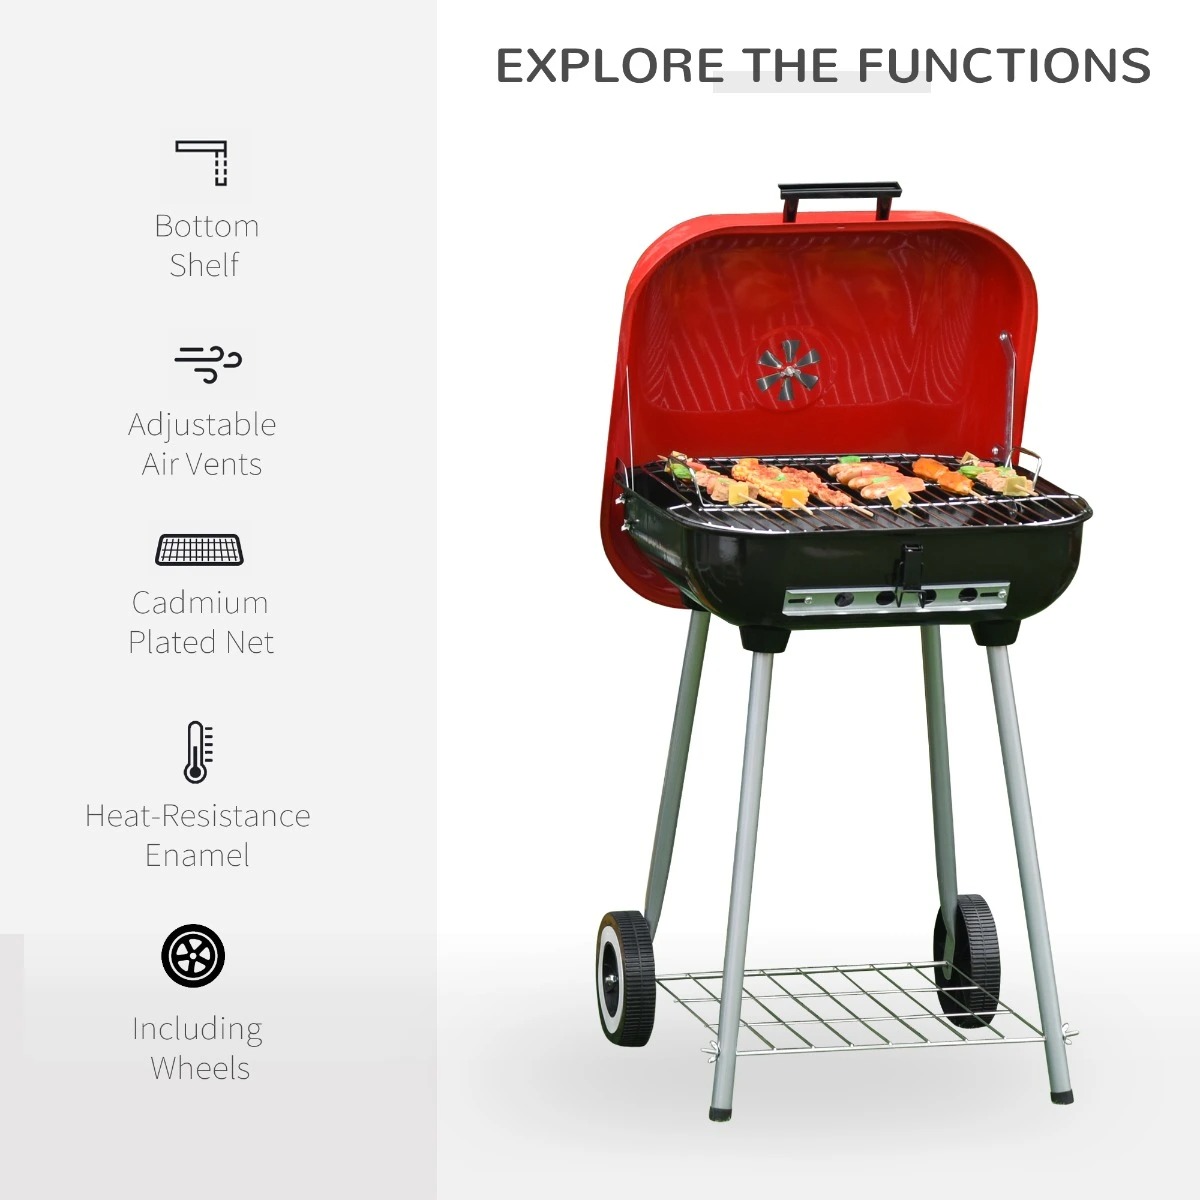 19" Steel Portable Outdoor Charcoal Barbecue Grill with Wheels